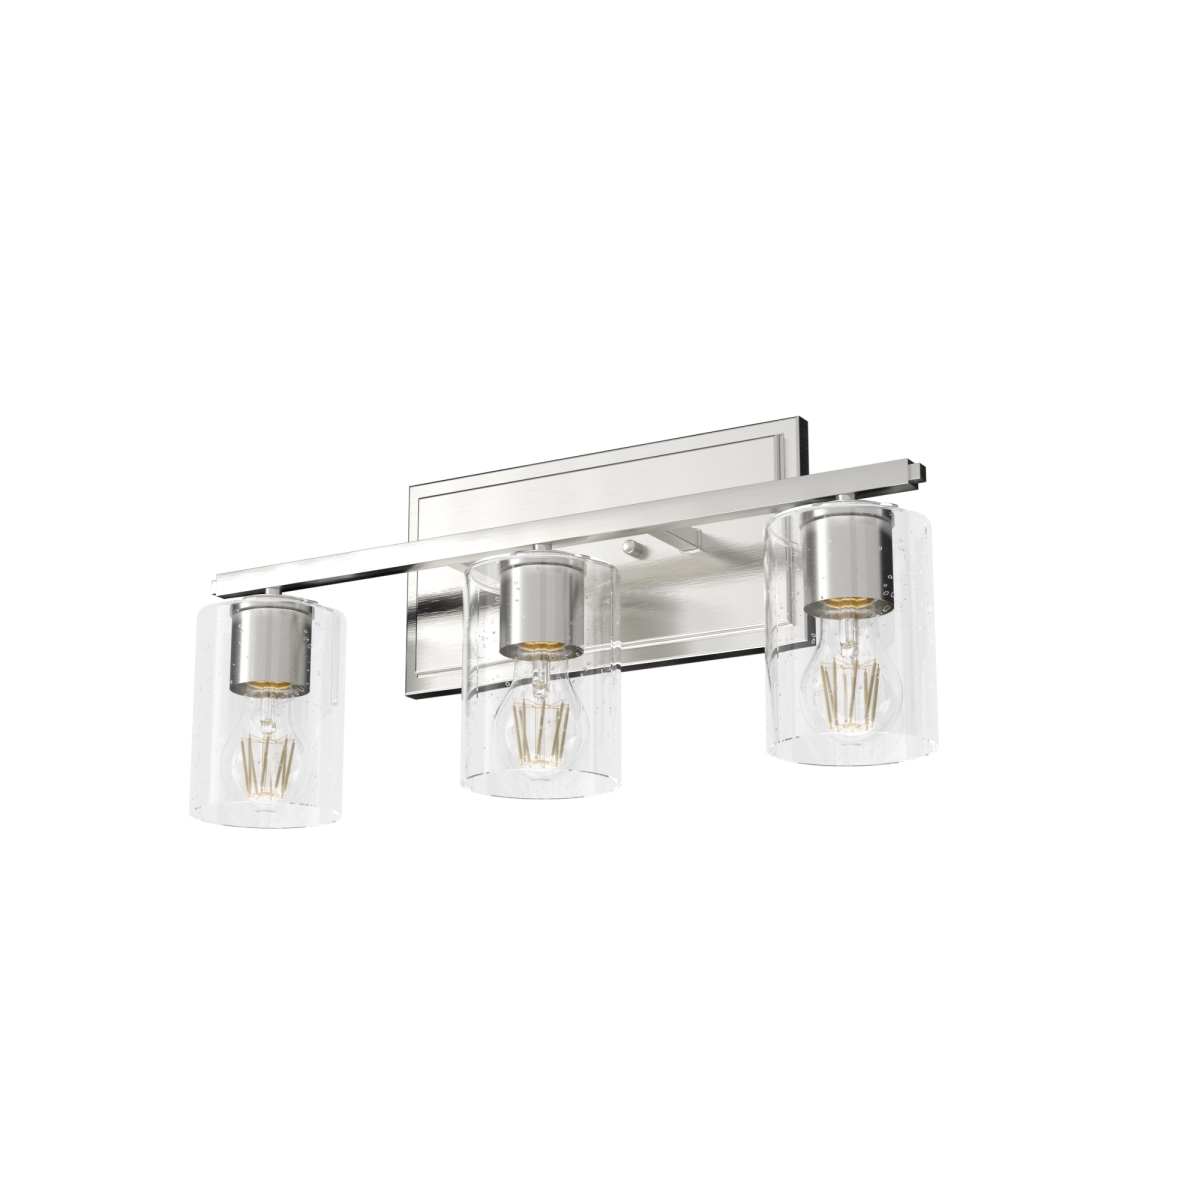 Picture of Hunter 48029 9.5 in. Kerrison Brushed Nickel with Seeded Glass 3 Light Bathroom Vanity Wall Light Fixture